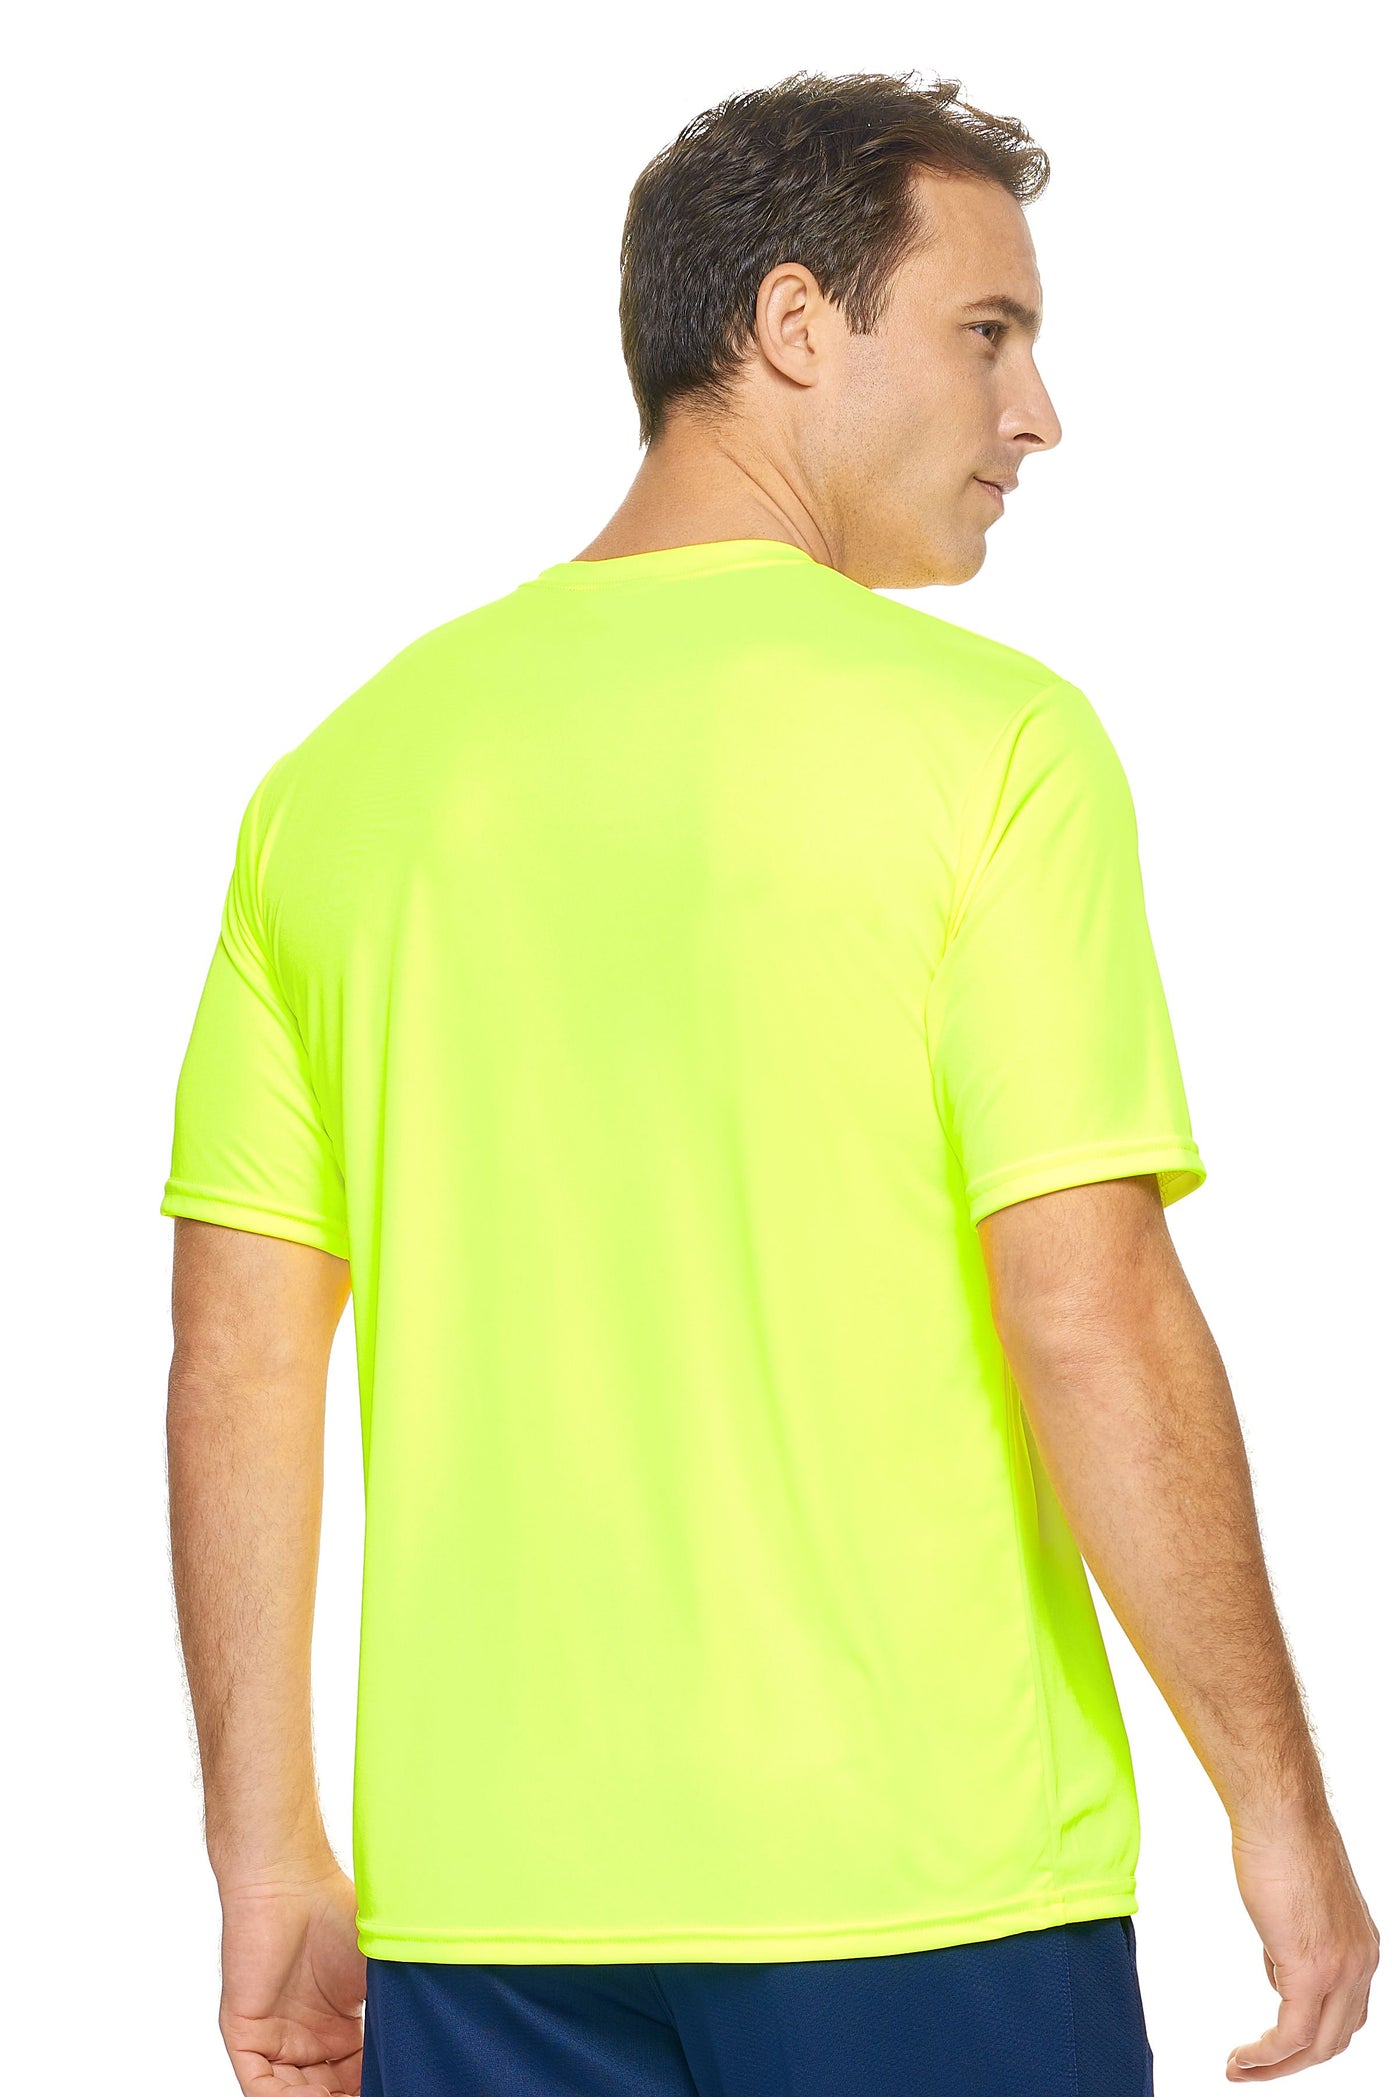 Expert Brand Retail Made in USA Men's Sportswear Activewear Running Long Sleeve Shirt Pk Max safety yellow 3#color_safety-yellow